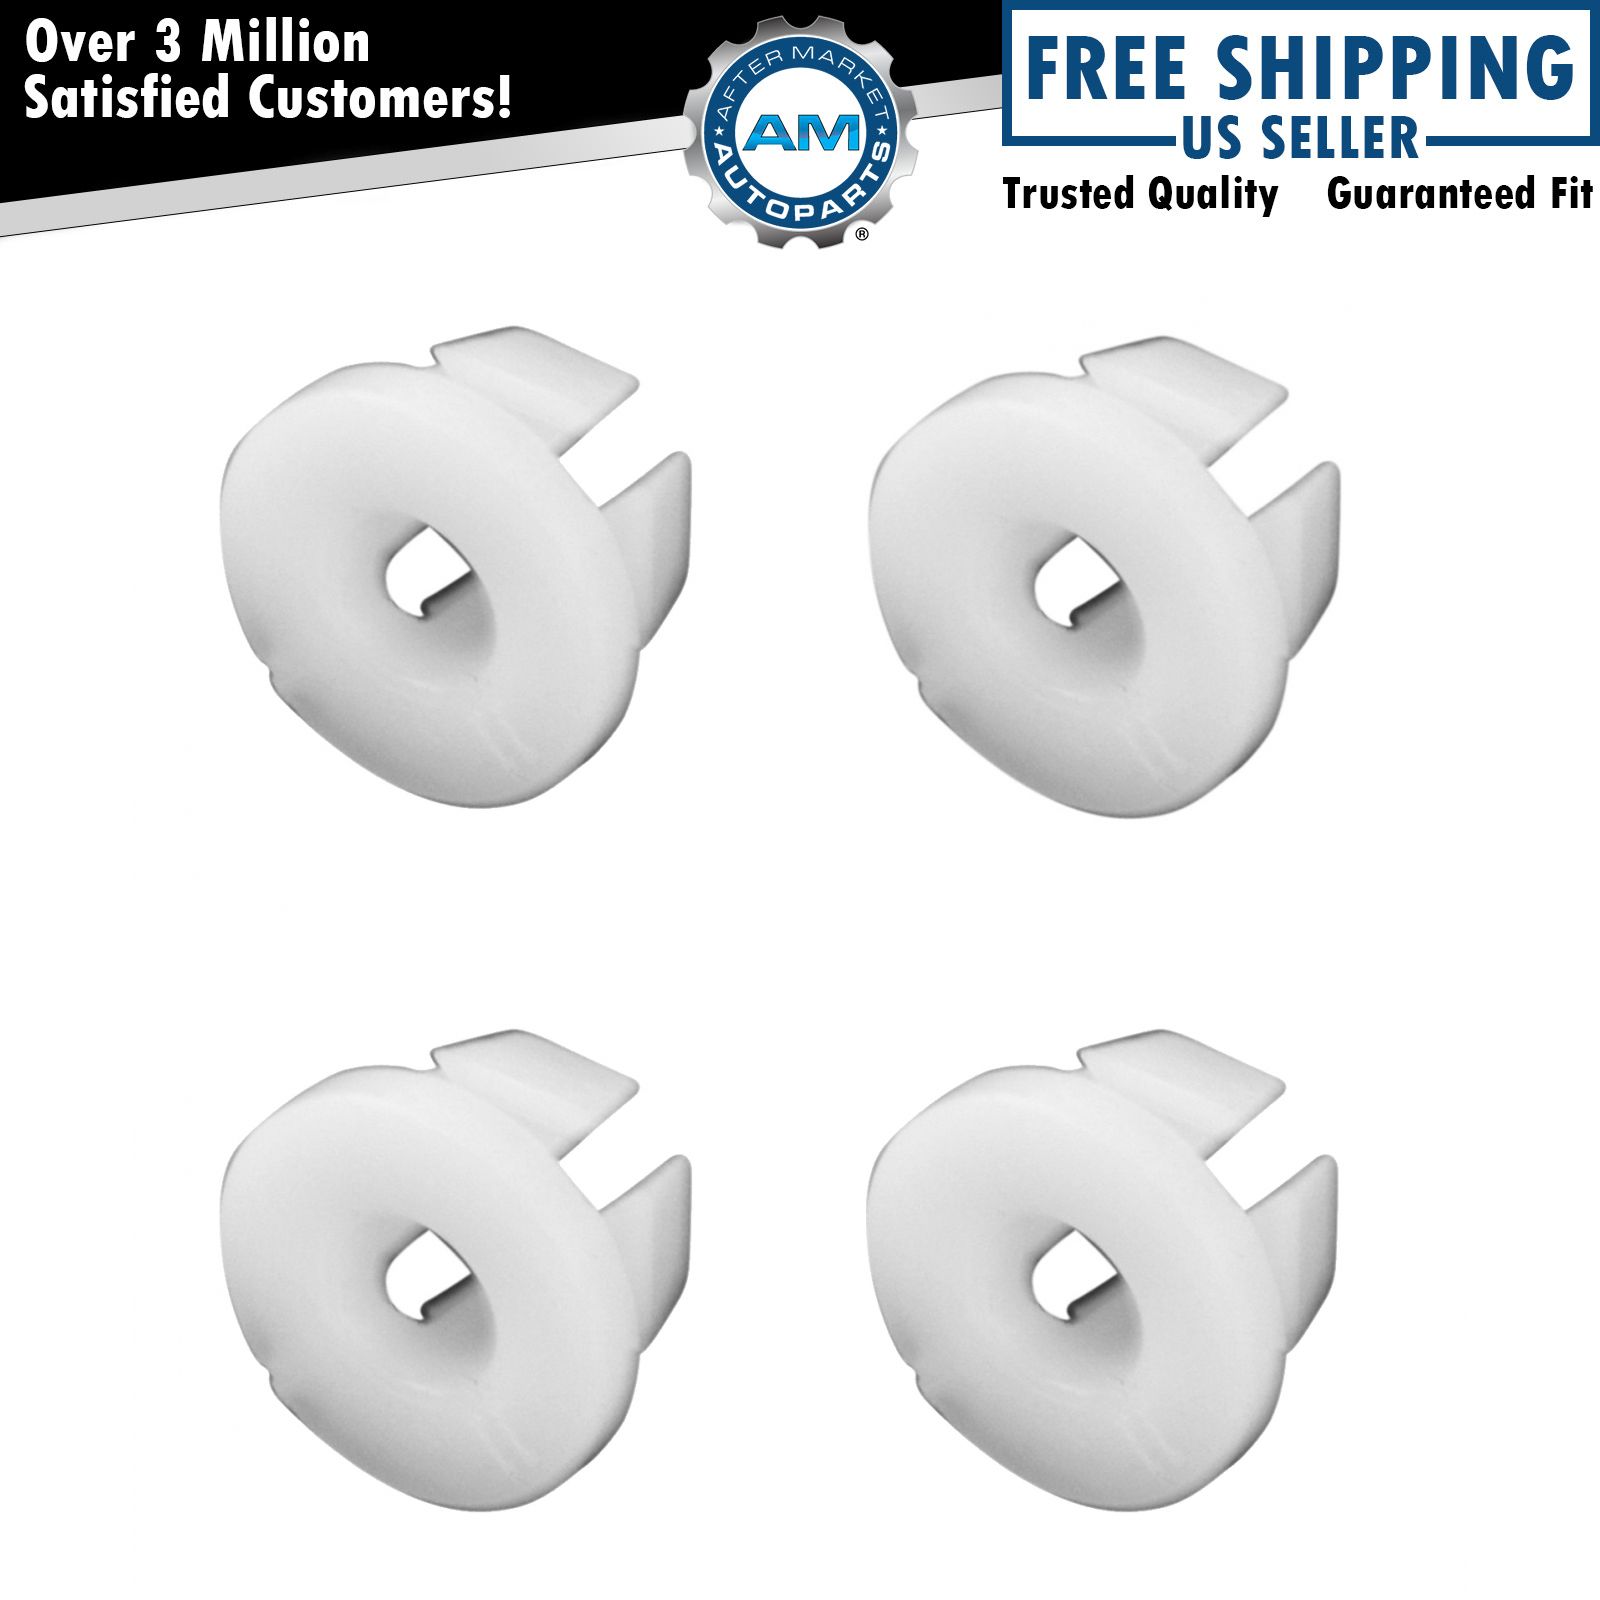 OEM Intake Manifold Runner Control Bushing Retainer Clip Set of 4 for Ford New